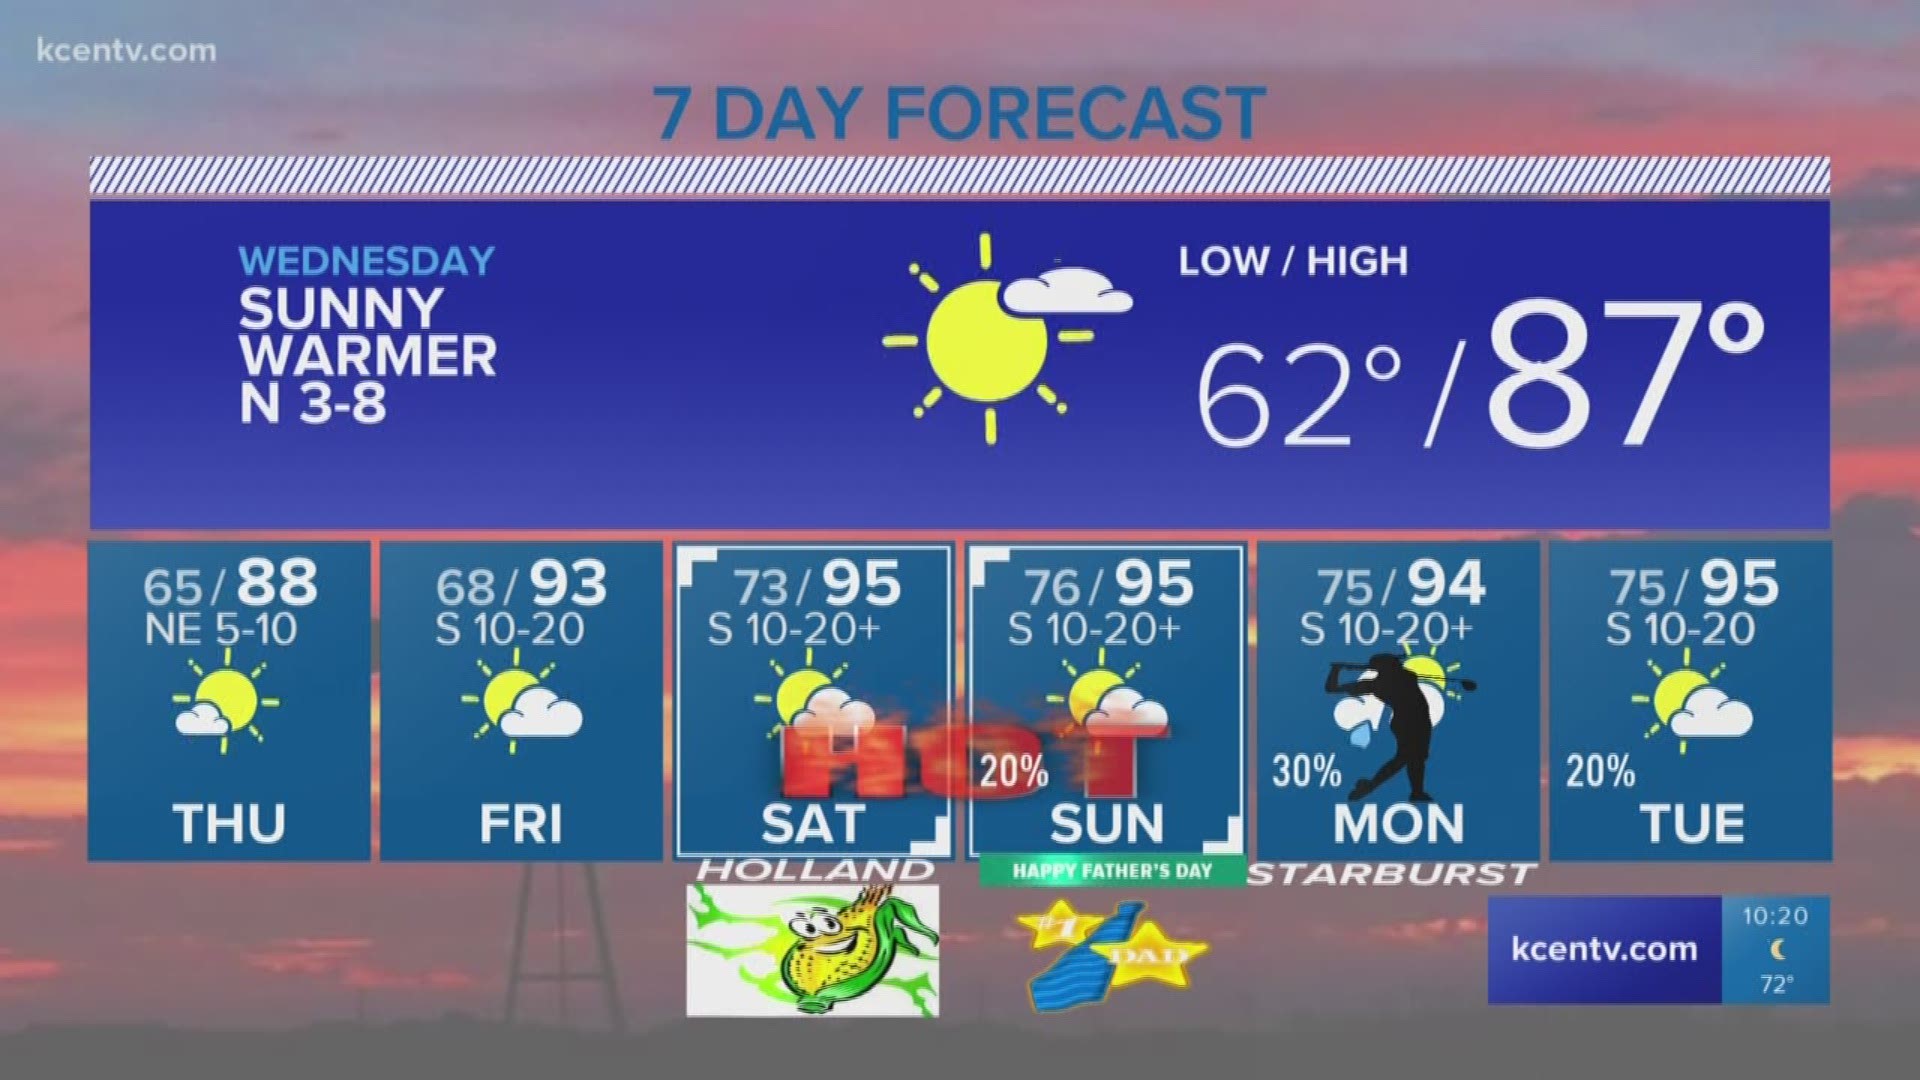 Chief meteorologist Andy Andersen says Wednesday's high is 87 degrees.